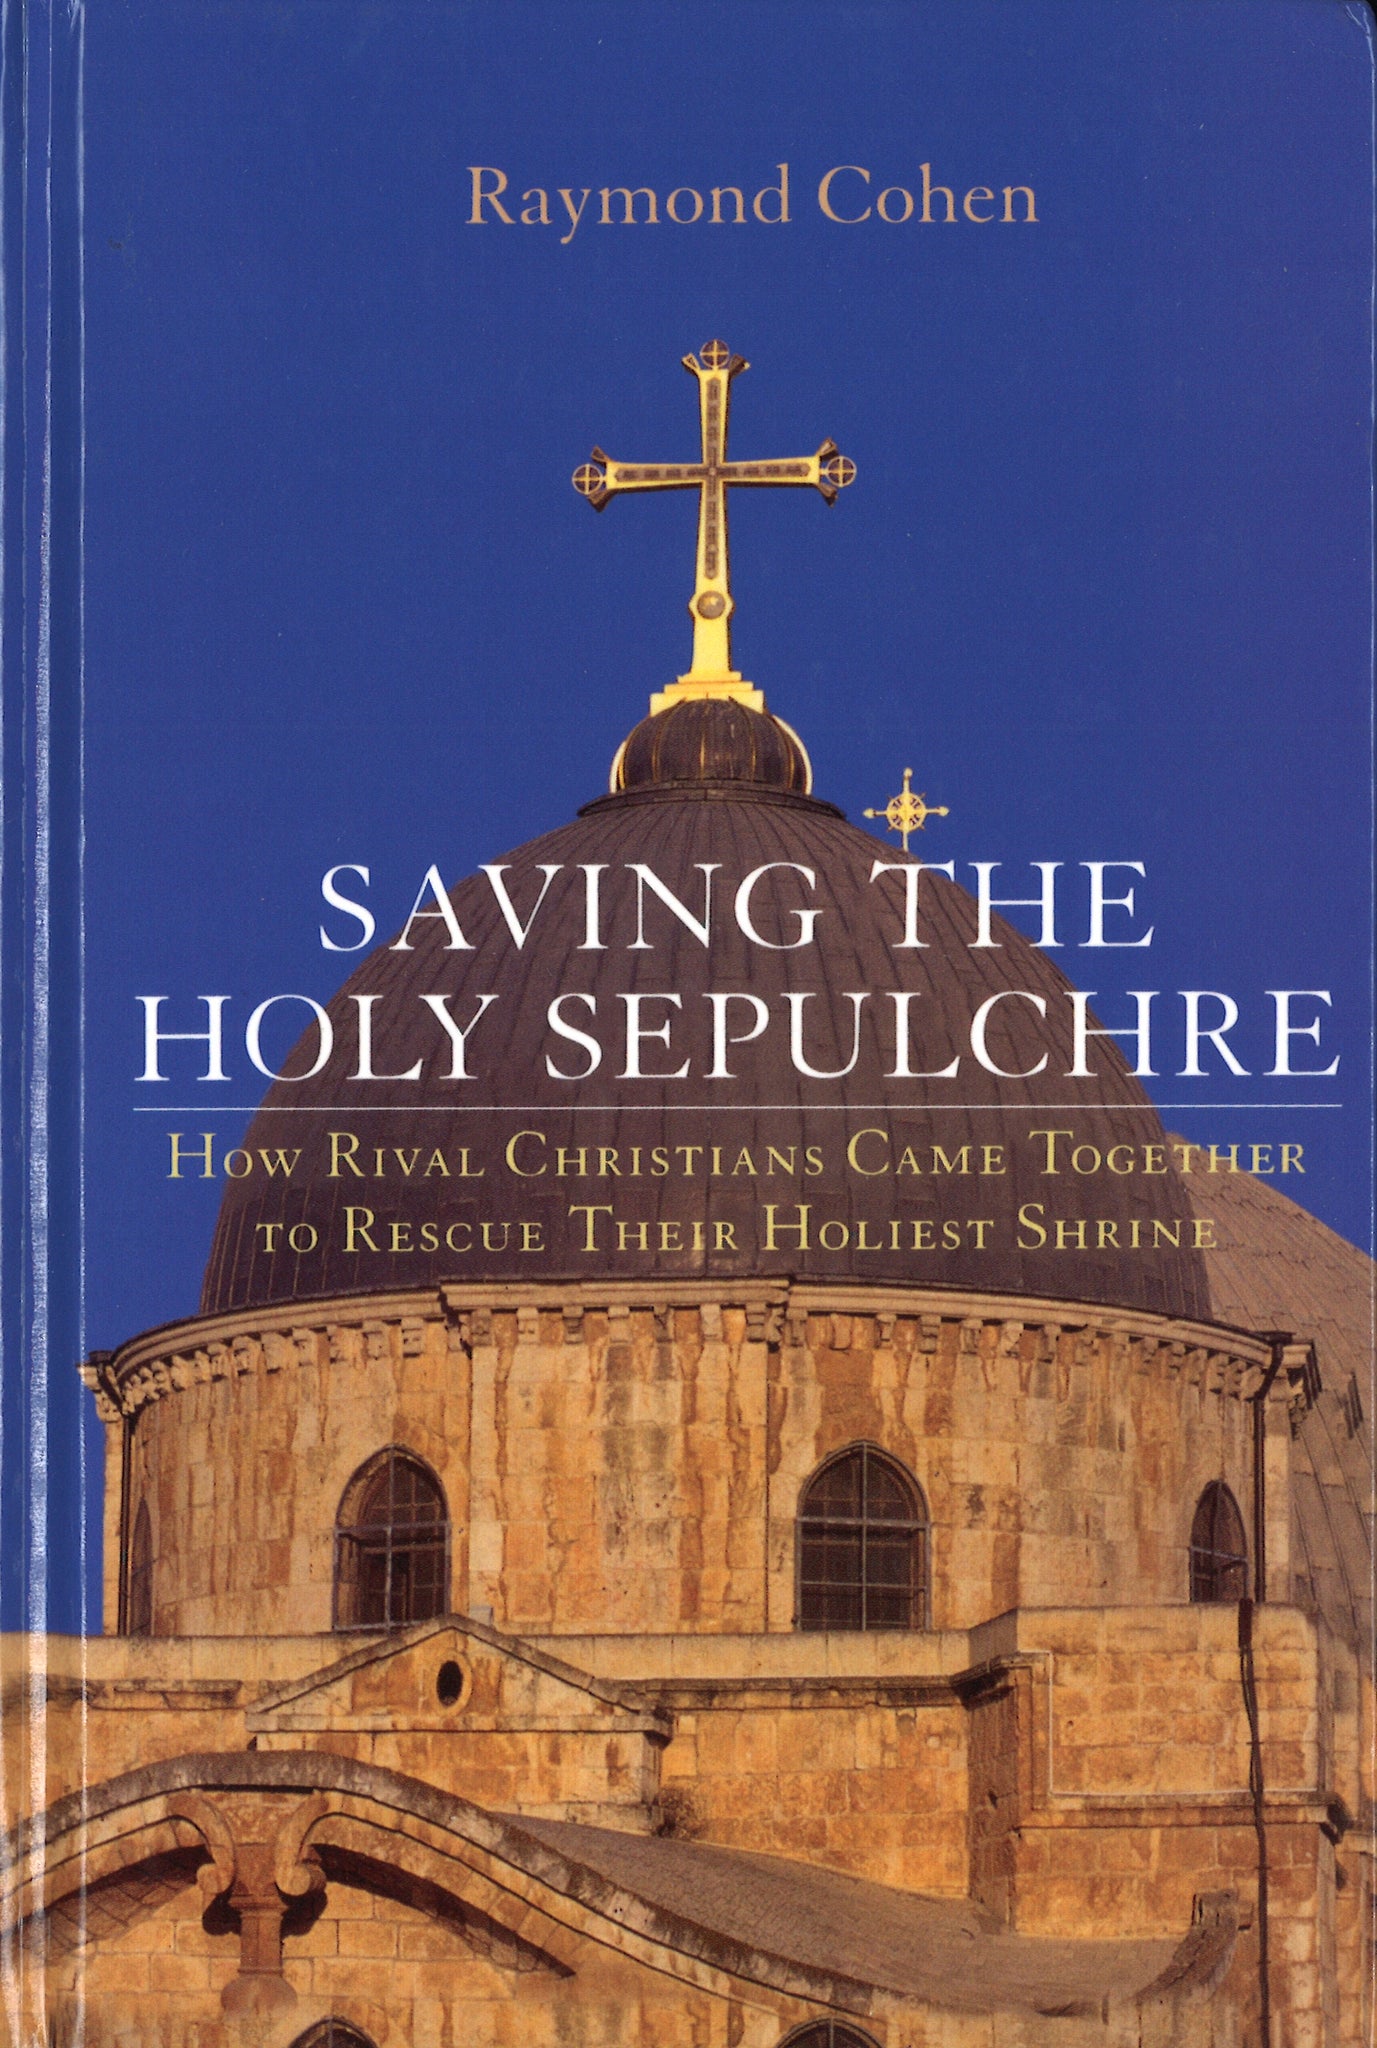 SAVING THE HOLY SEPULCHRE: How Rival Christians Came Together to Rescue Their Holiest Shrine